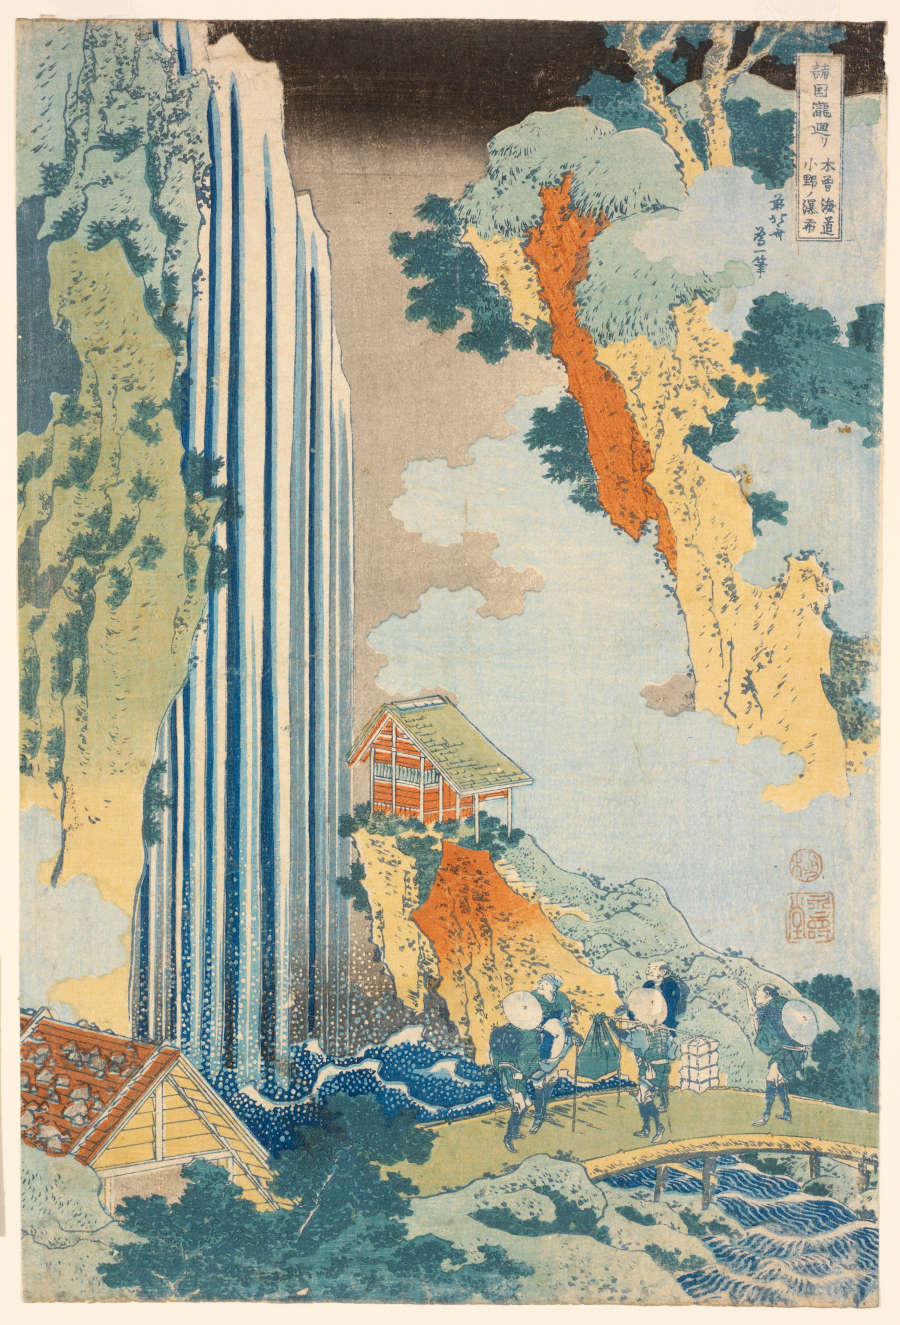 Woodblock print of yellow and orange houses amongst dramatic cloudy, forested orange-yellow cliff sides and flanked by light blue clouds, a waterfall, and blue-green trees. Three men cross a bridge.